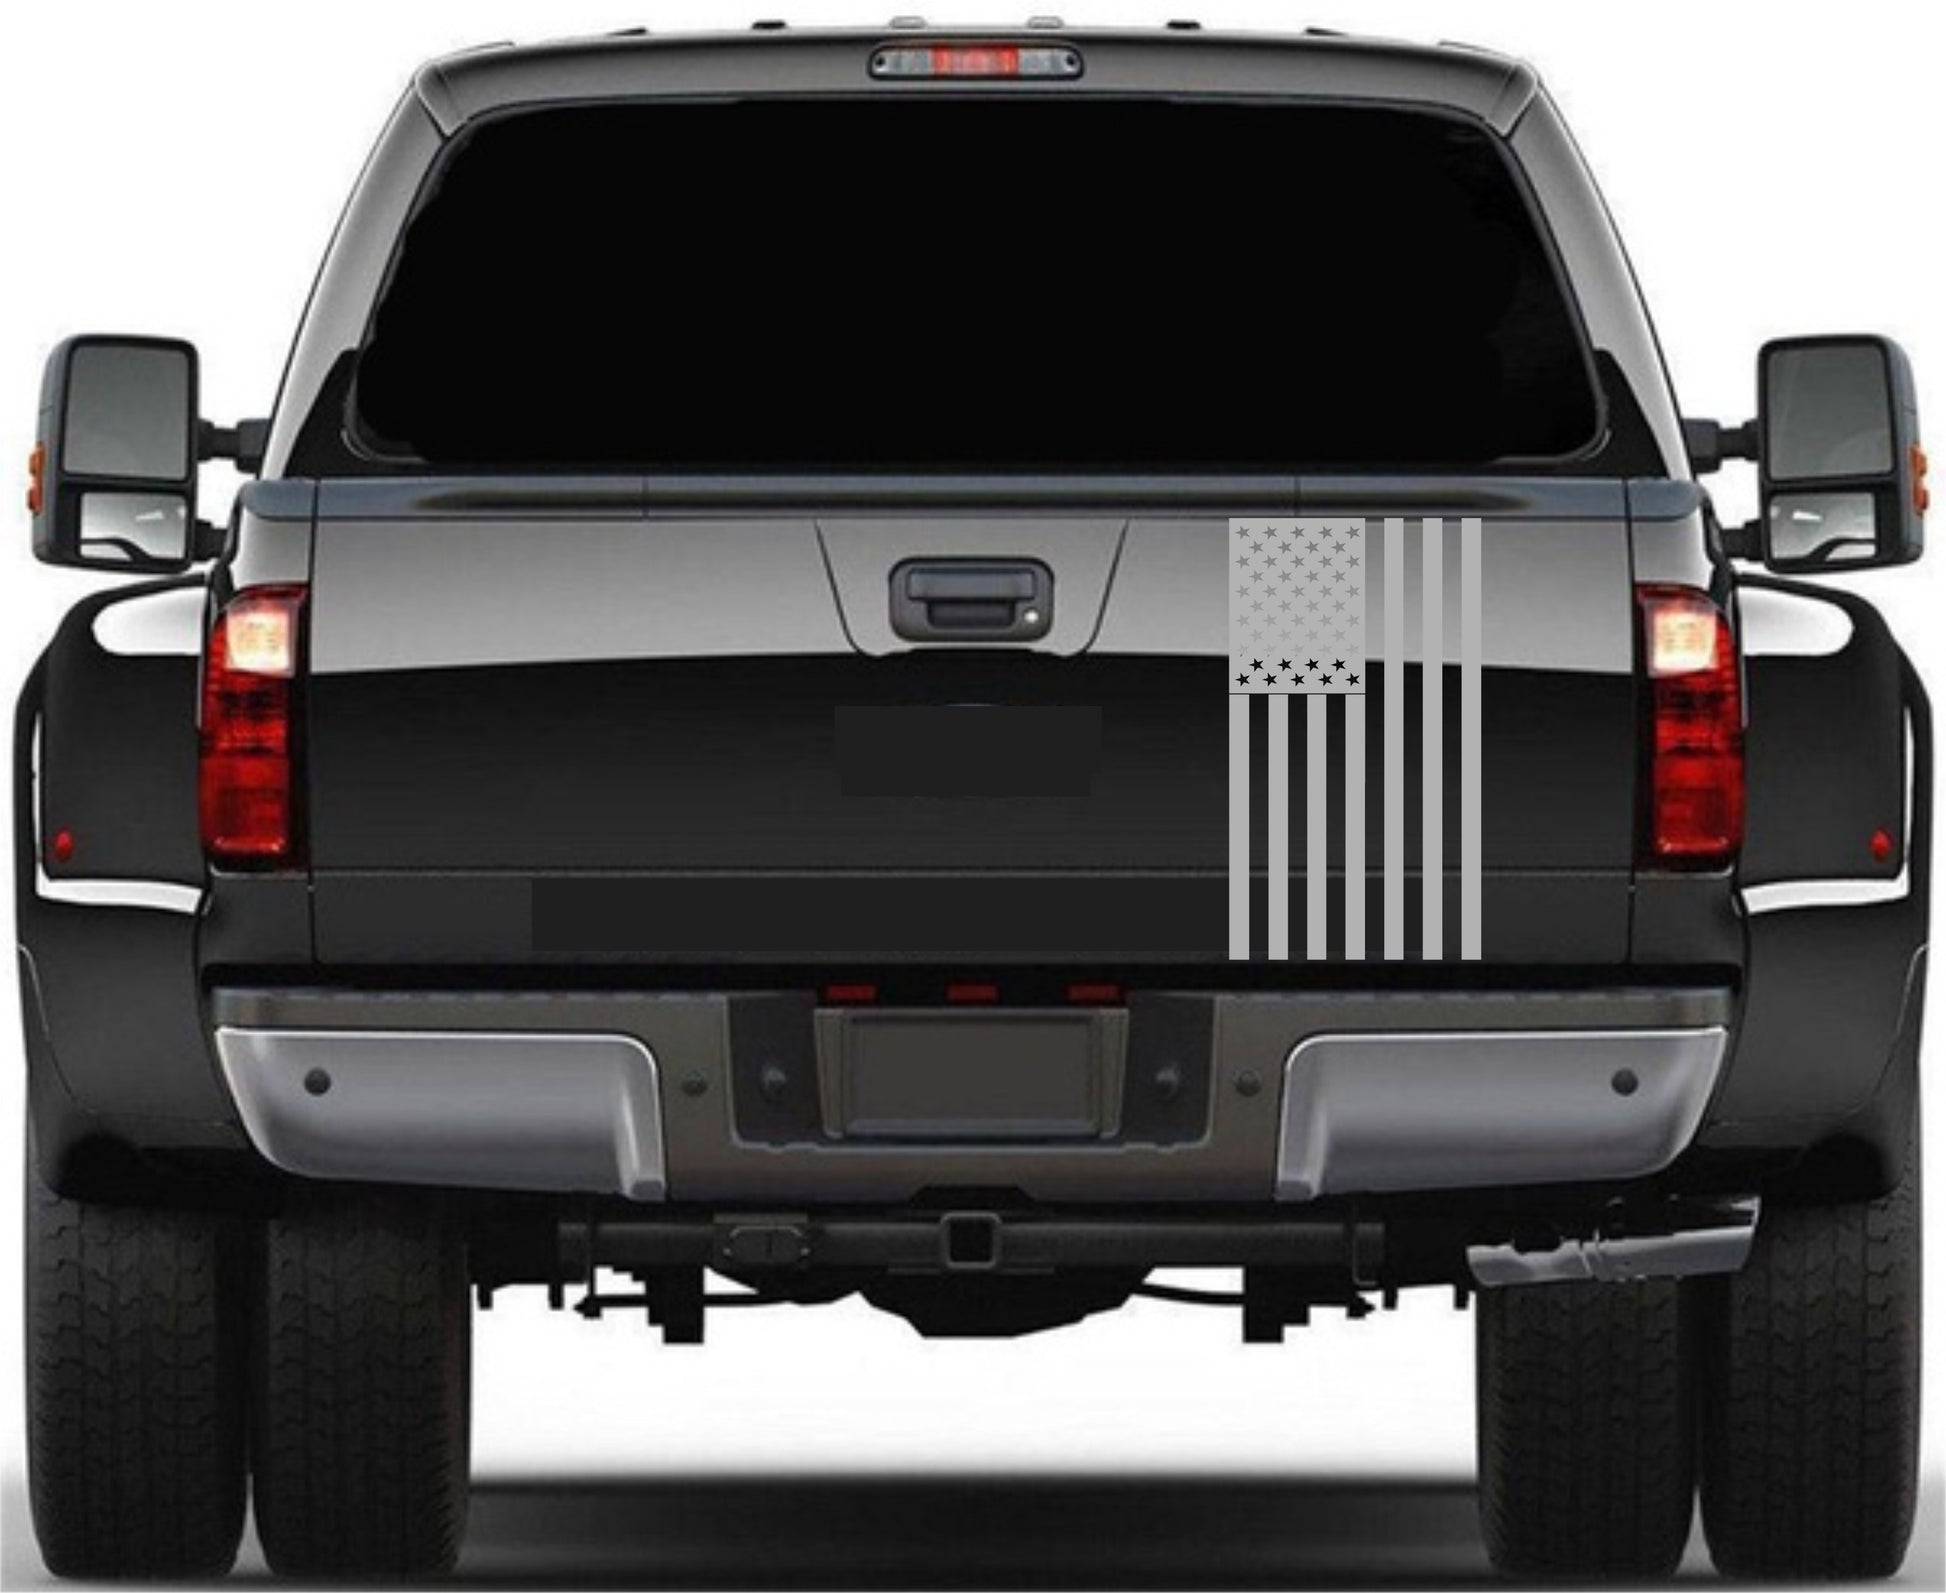 American Flag Decal Fits Any Truck's Tailgate. Sizes Available